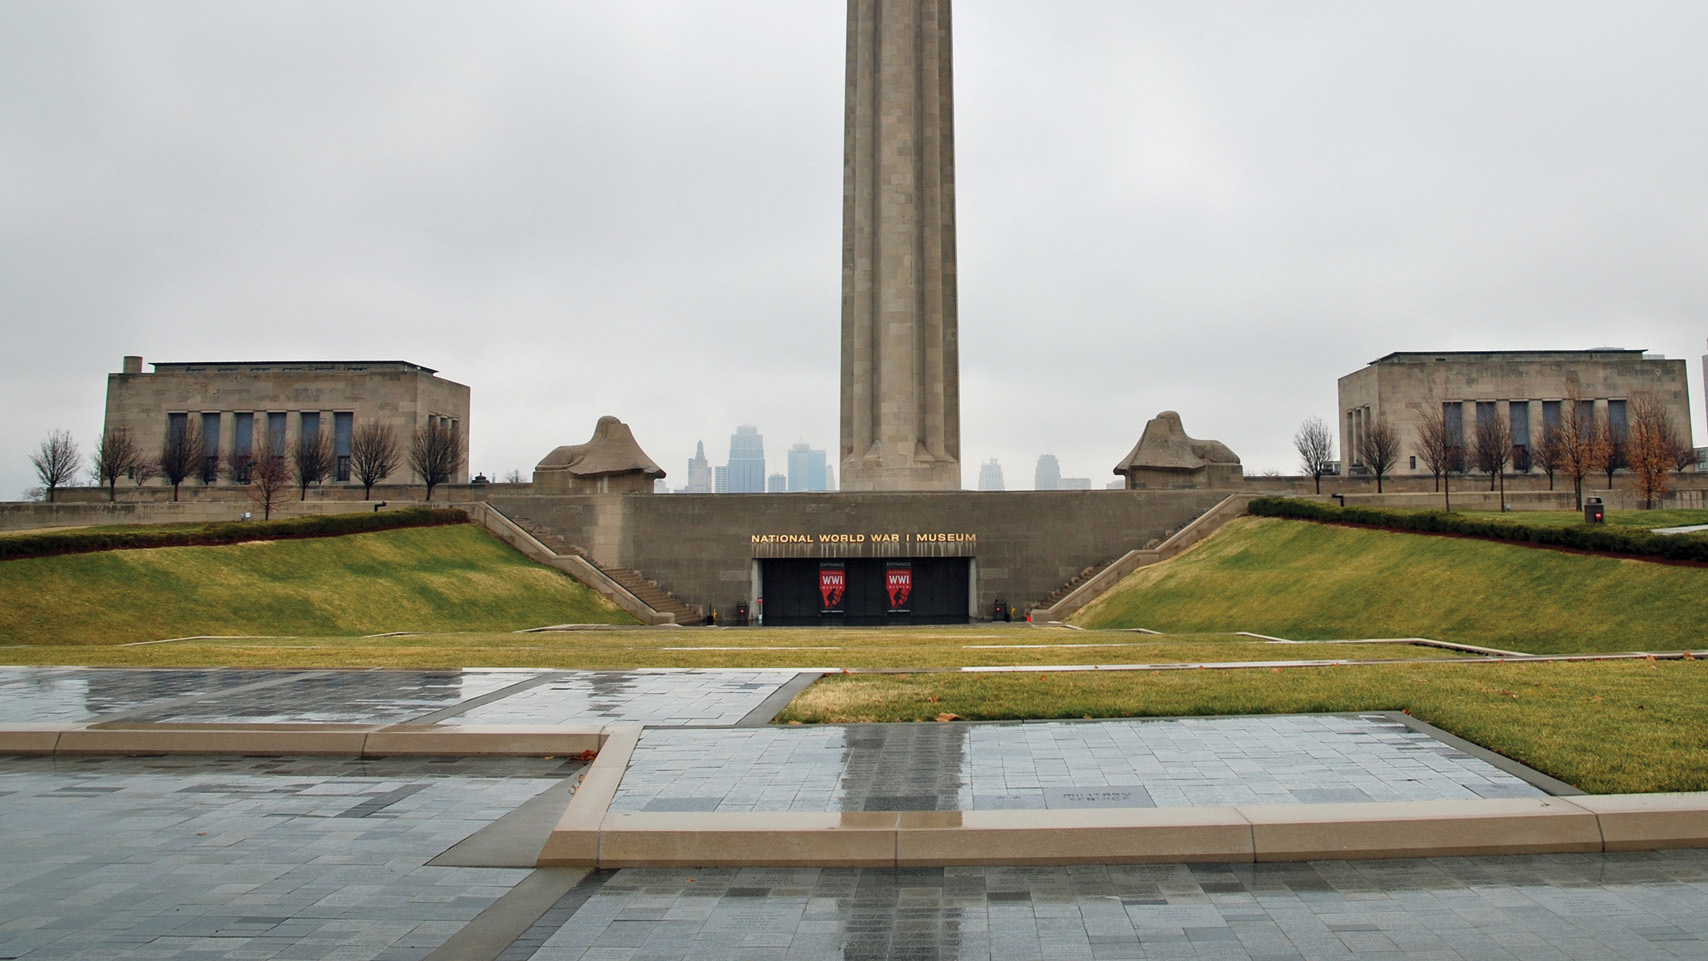 Liberty Memorial, which opened in 1926, languished from neglect for many decades until a grass-roots effort resulted in a major restoration.